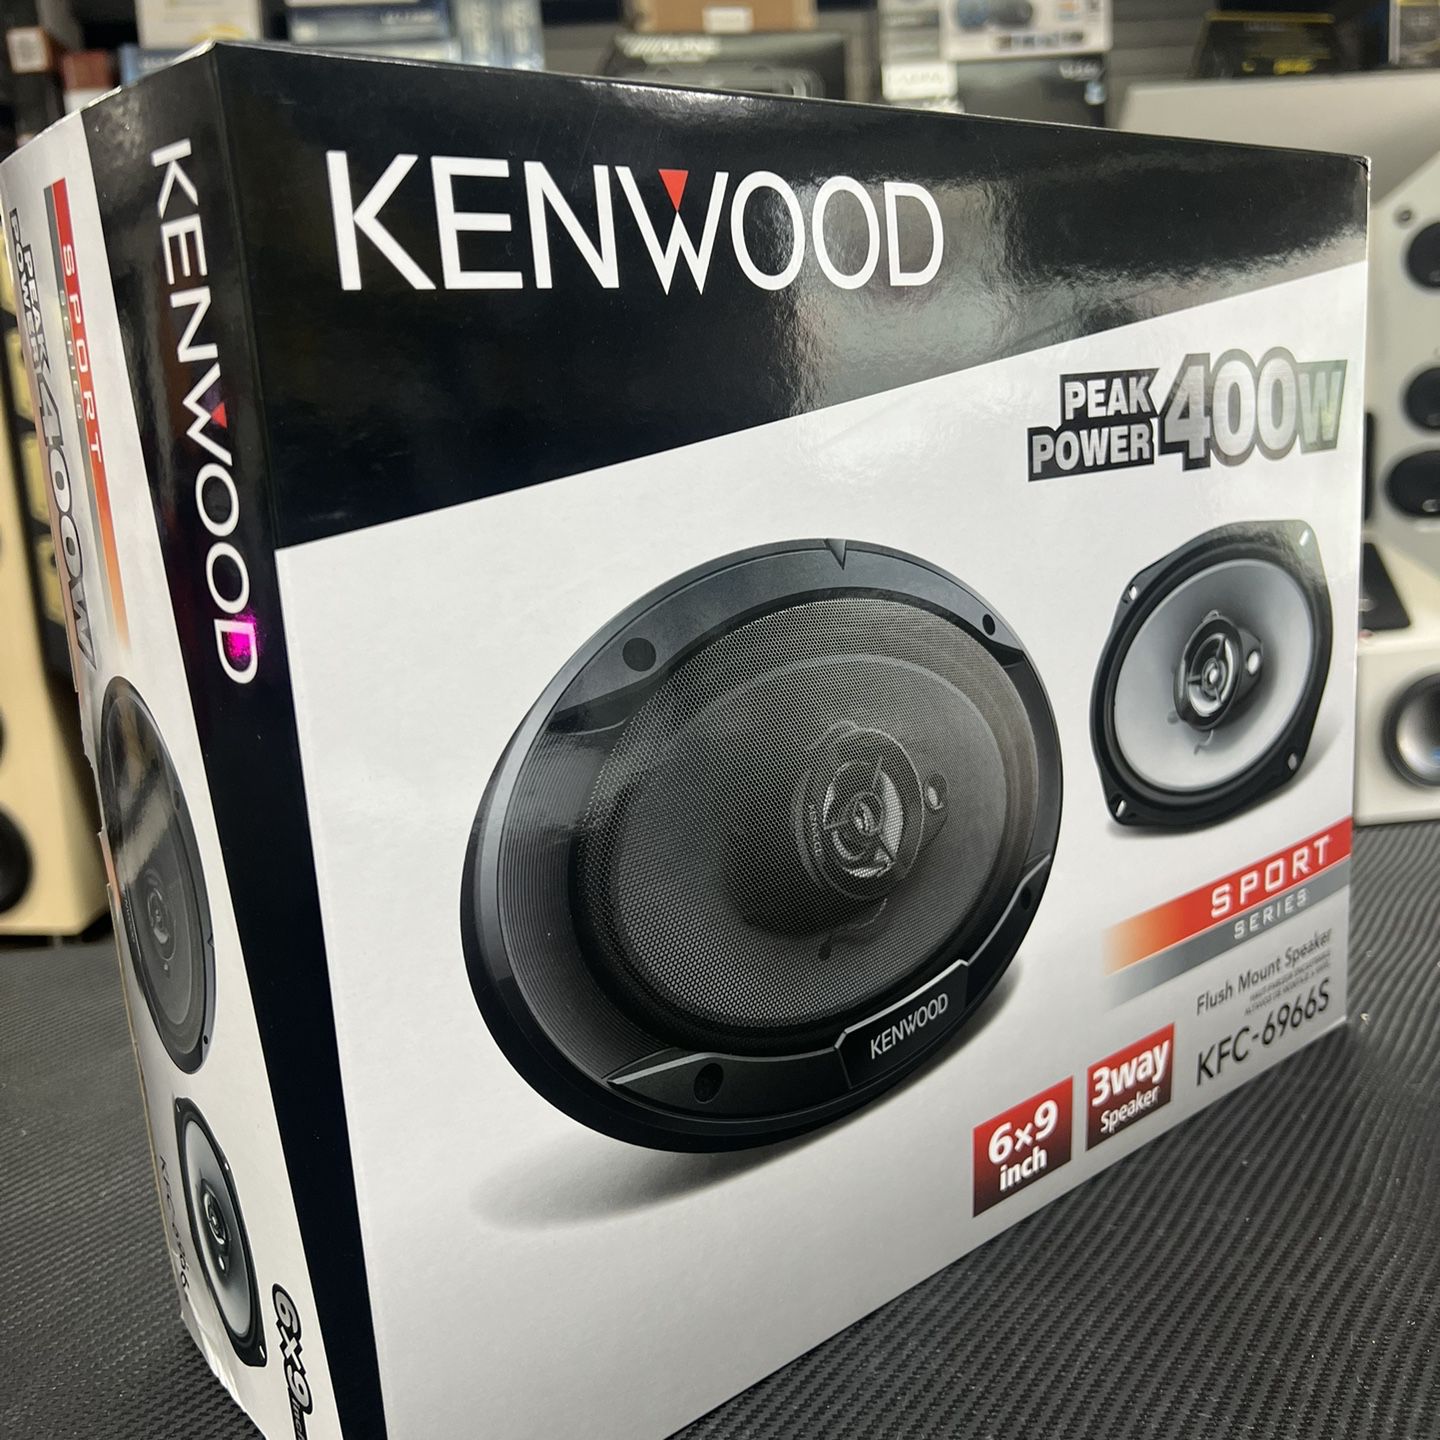 Kenwood 6x9 Speakers On Sale For $37Only 